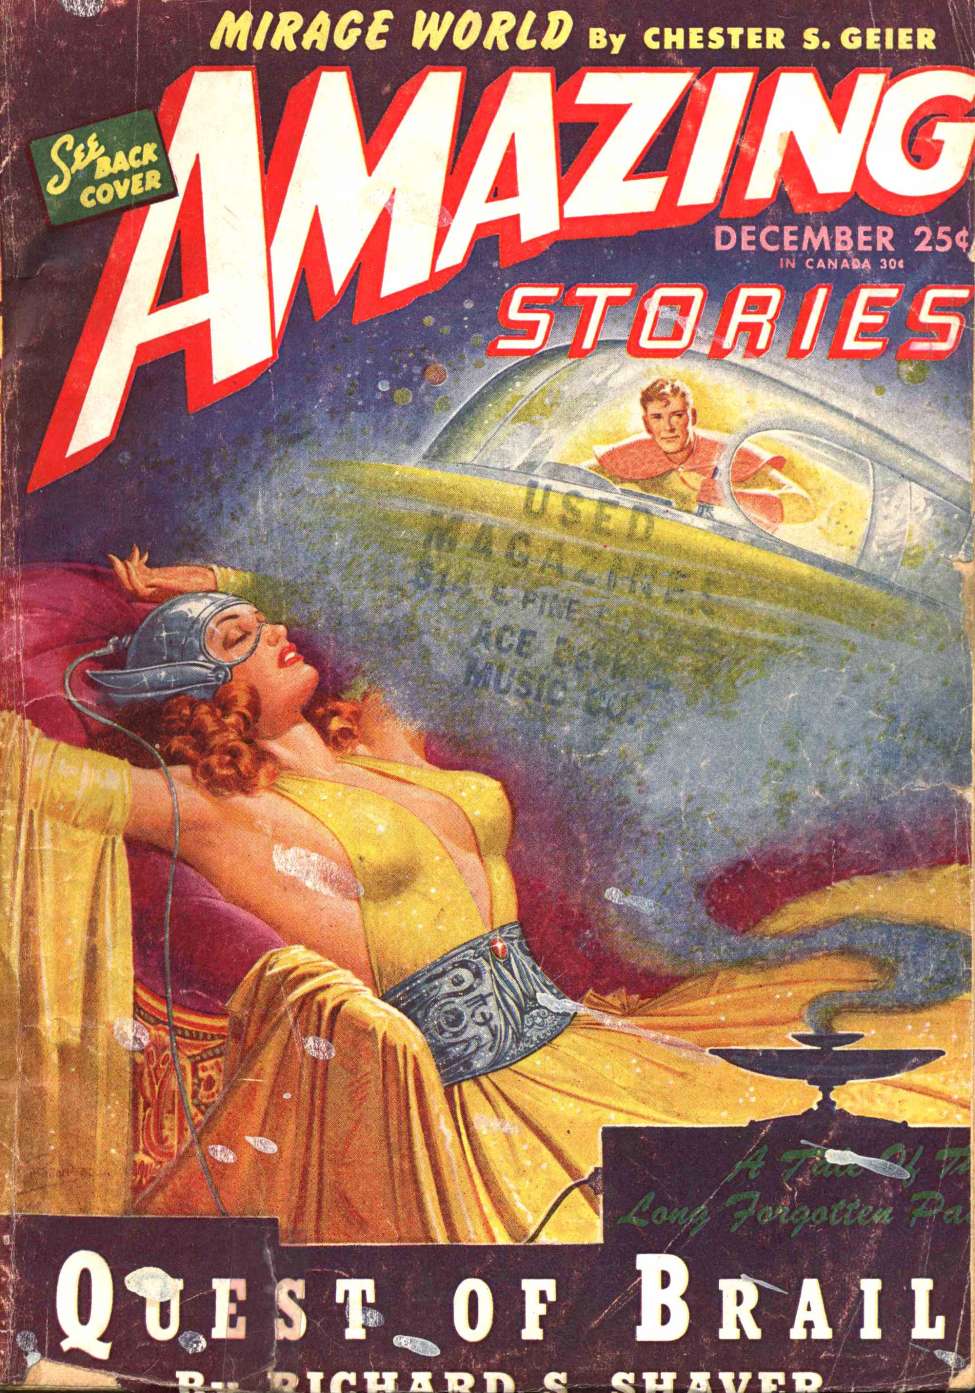 Book Cover For Amazing Stories v19 4 - Quest of Brail - Richard S. Shaver